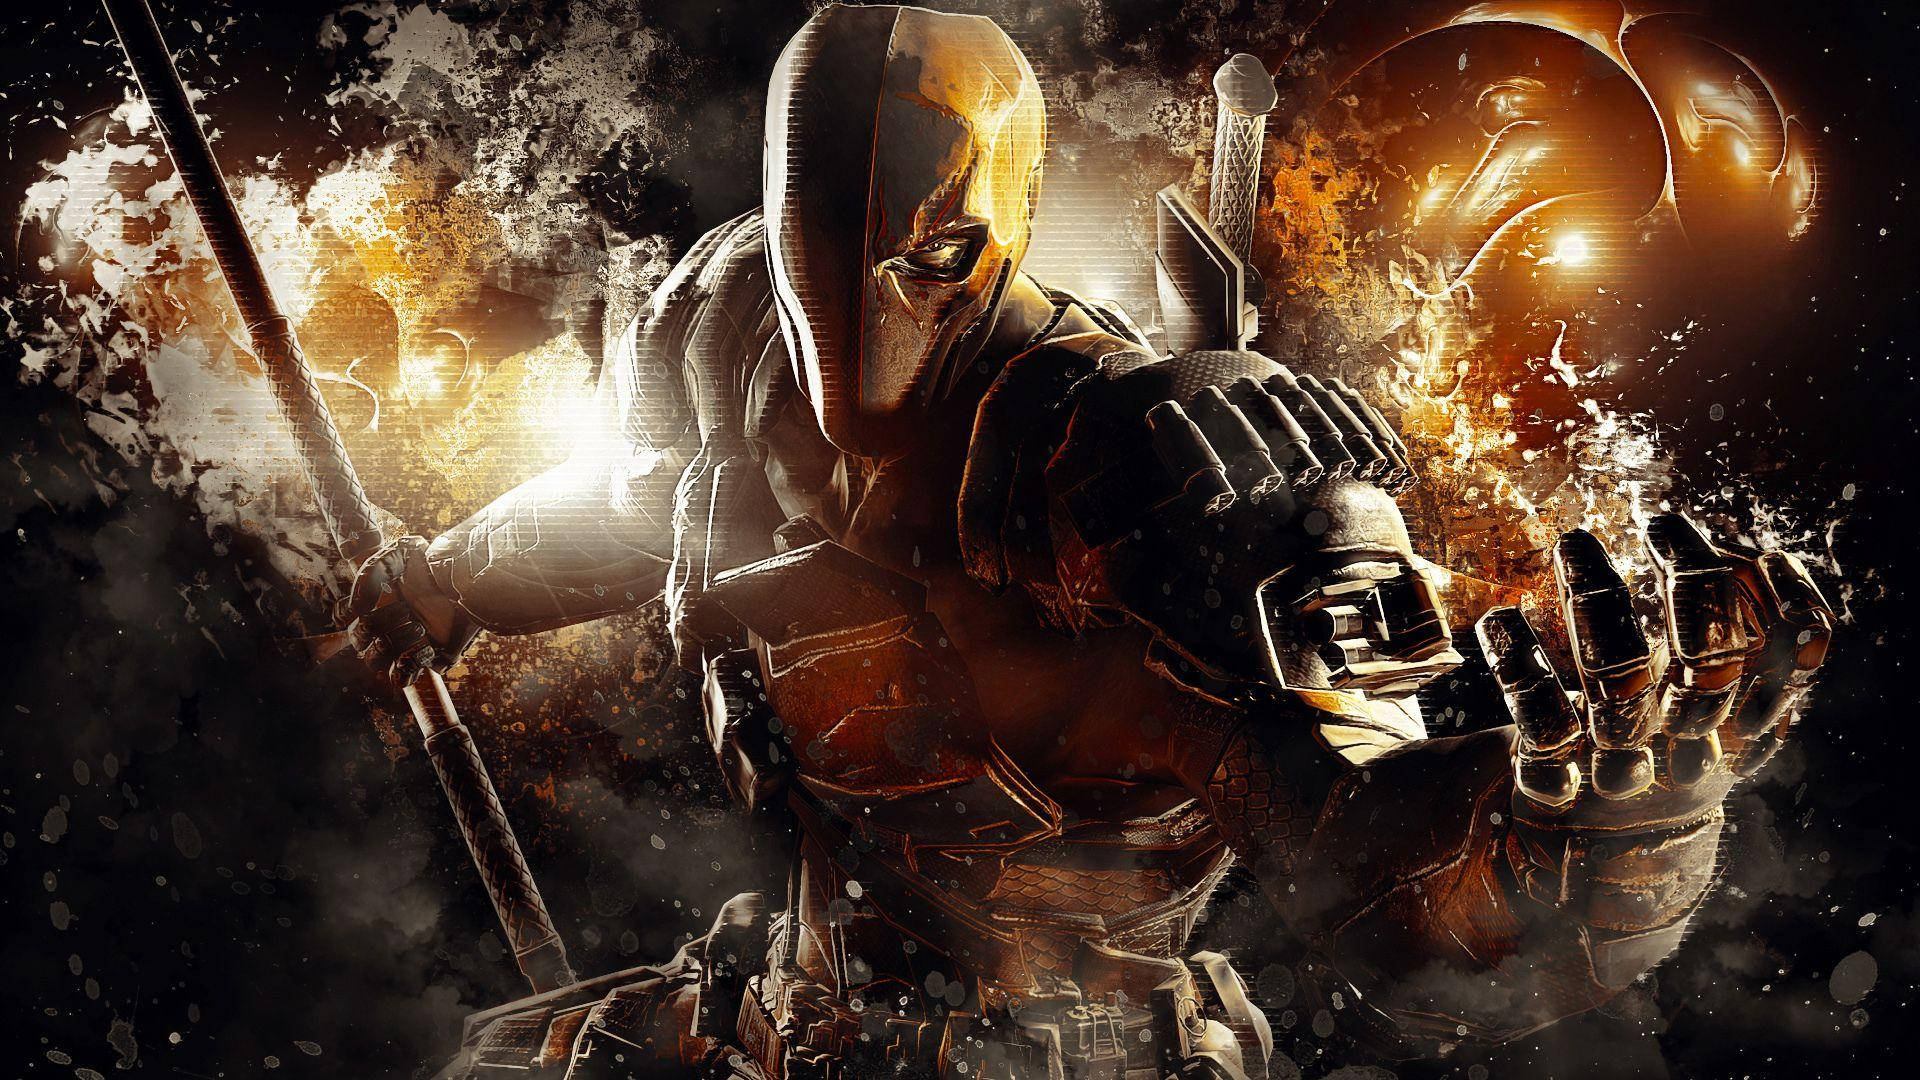 1920x1080 Full Hd Deathstroke Surrounded By Flames Wallpaper